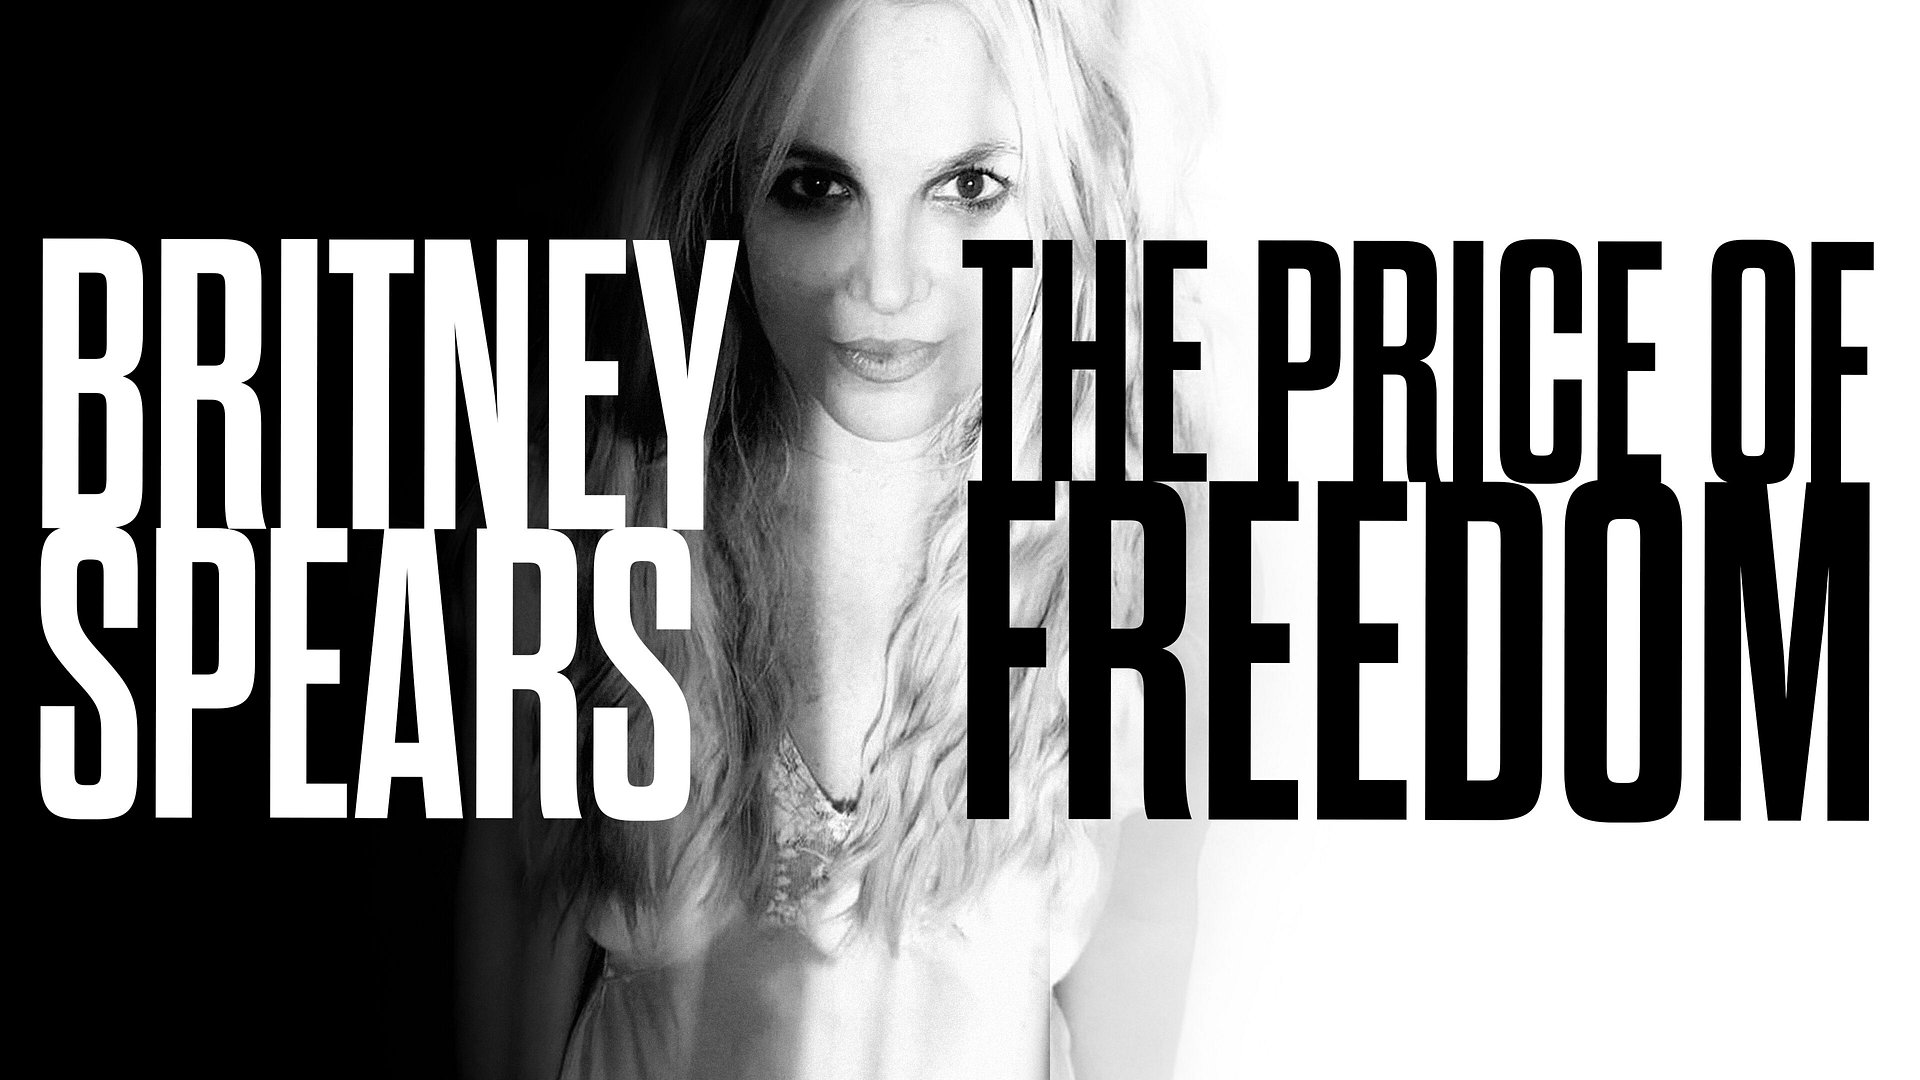 Britney Spears: The Price of Freedom